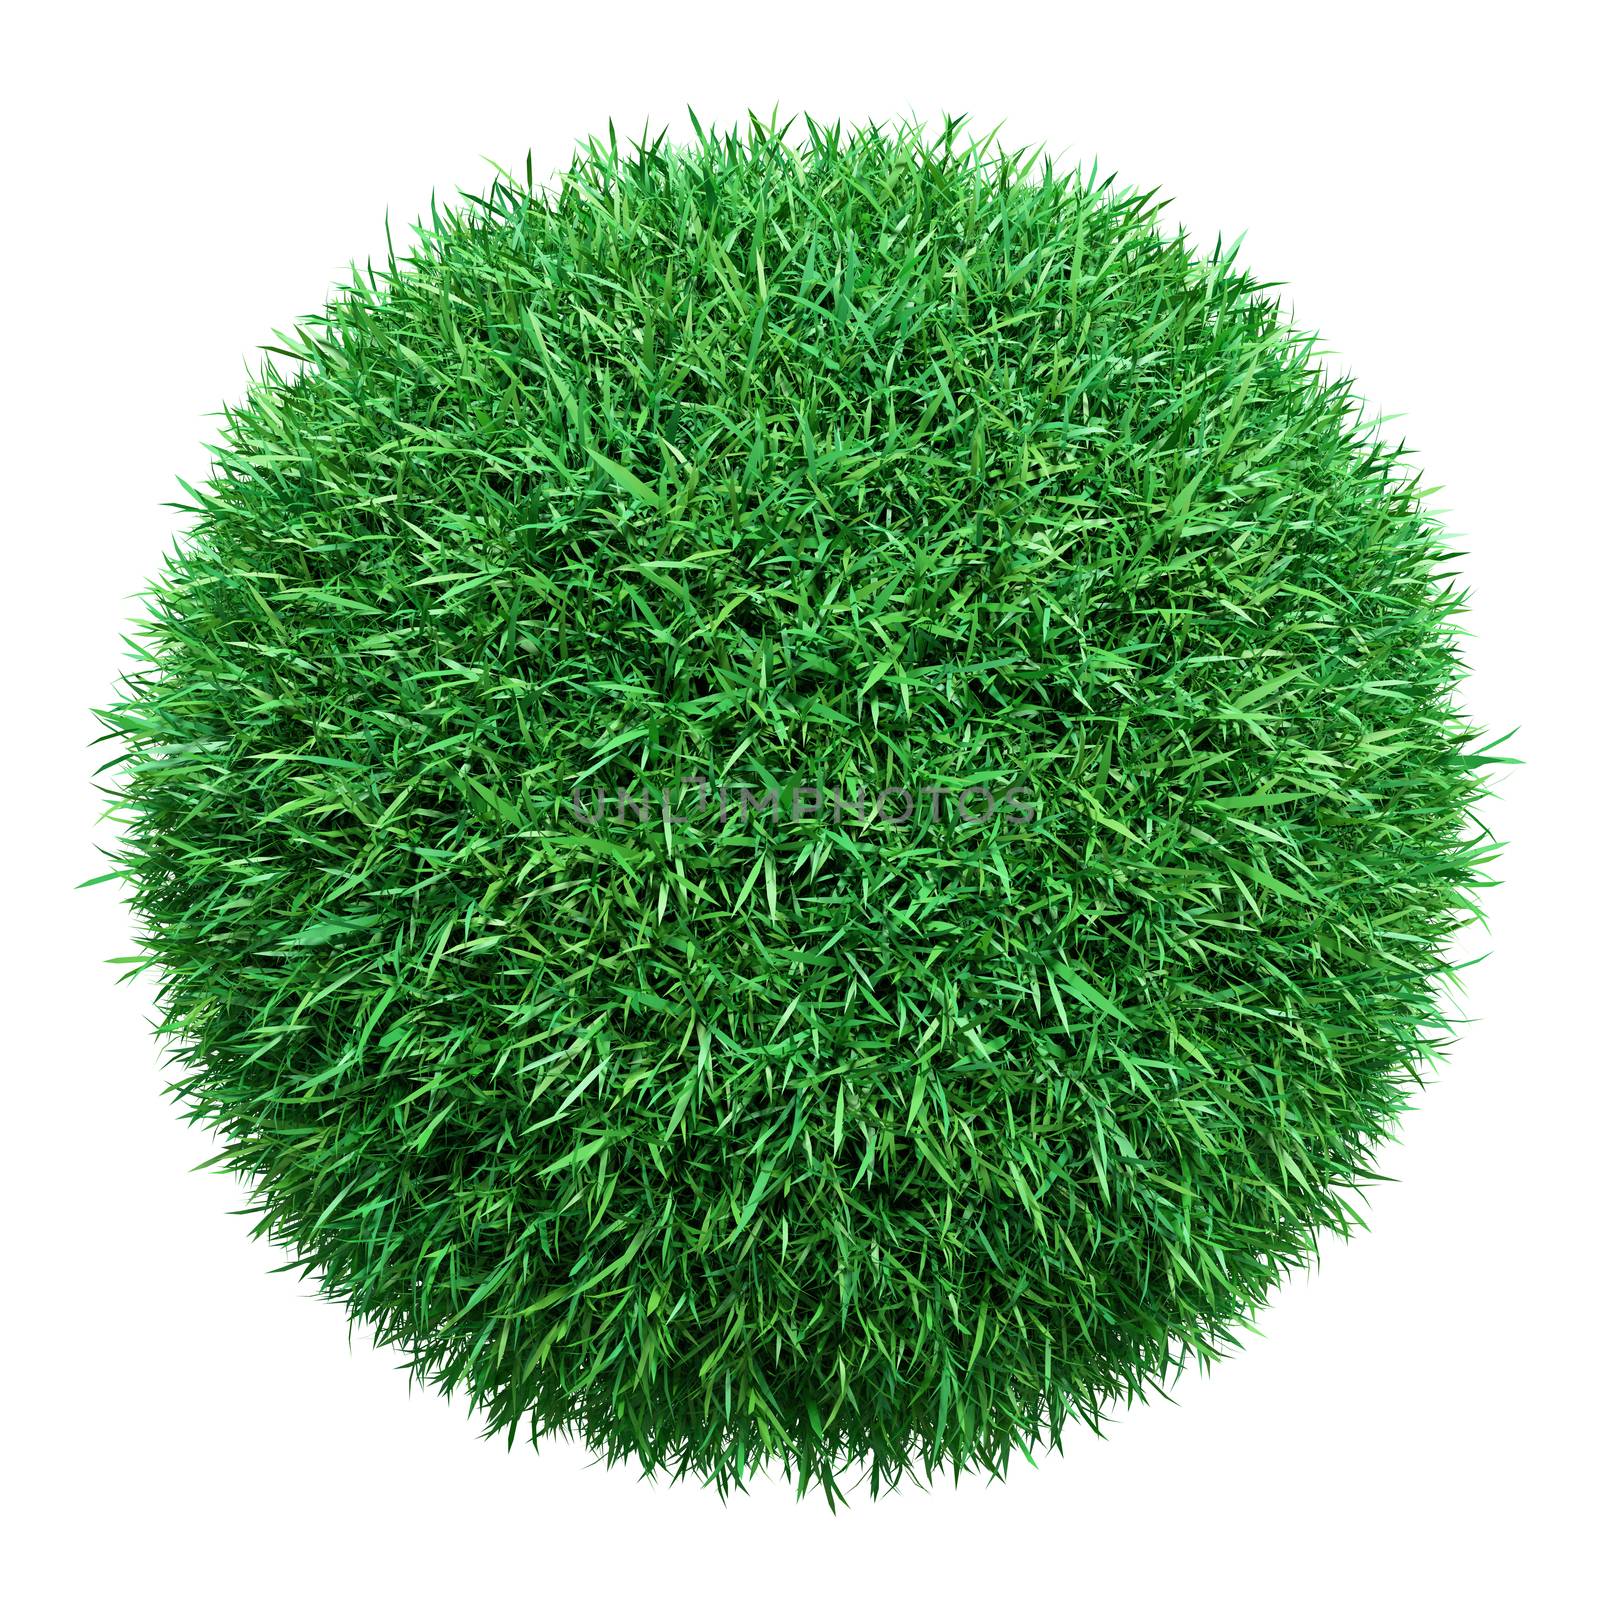 Green grass ball. Isolated on white by cherezoff